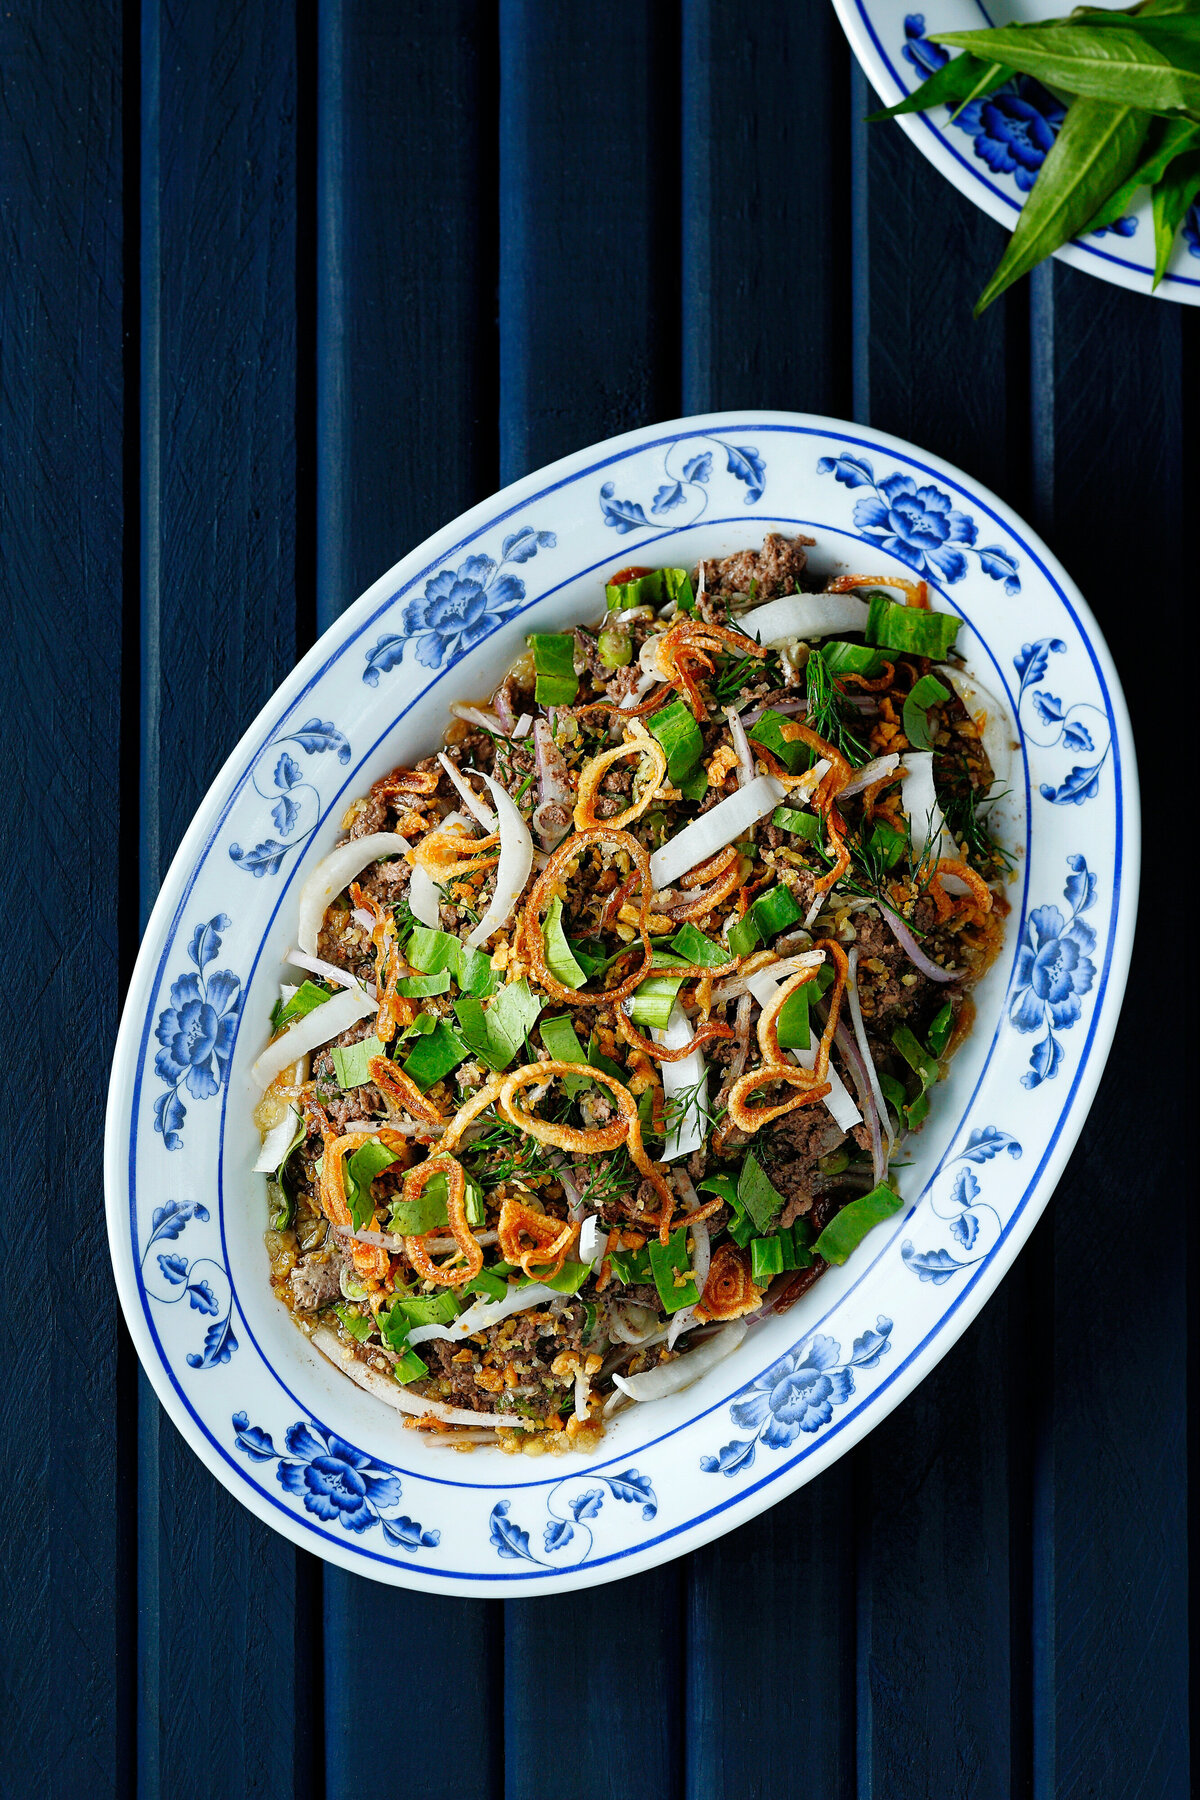 A stirfry dish on a plate